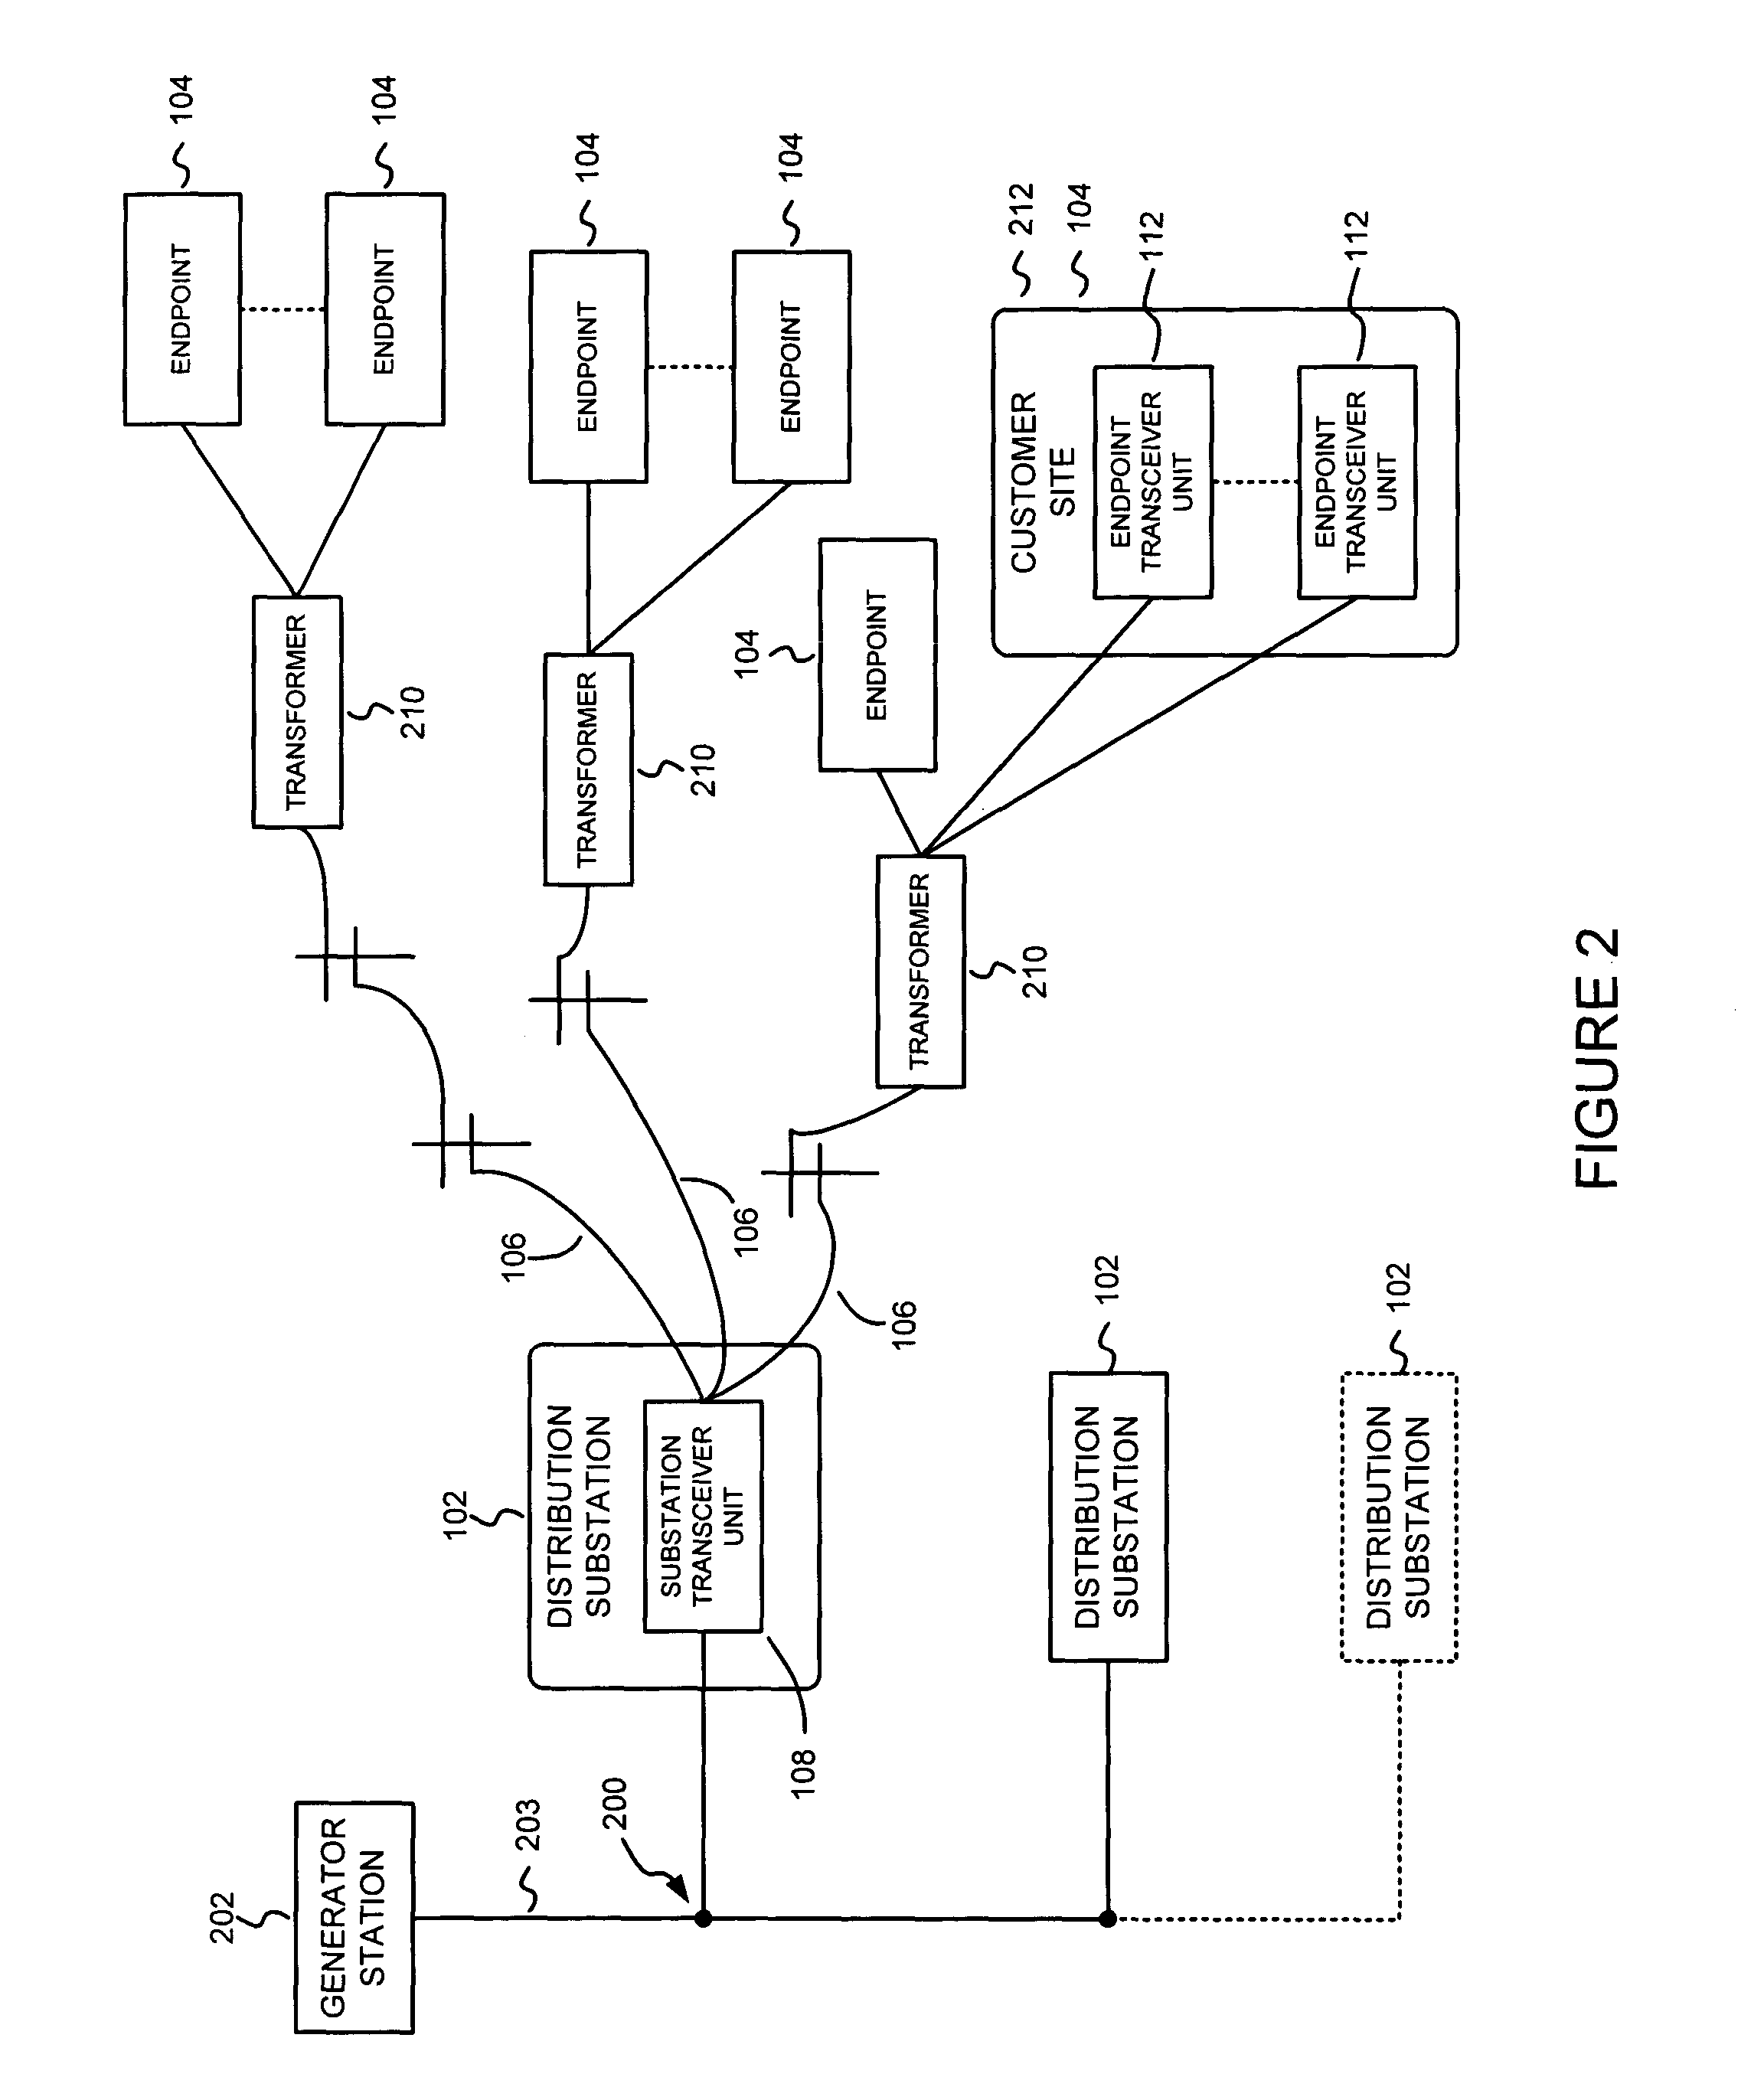 Endpoint receiver system